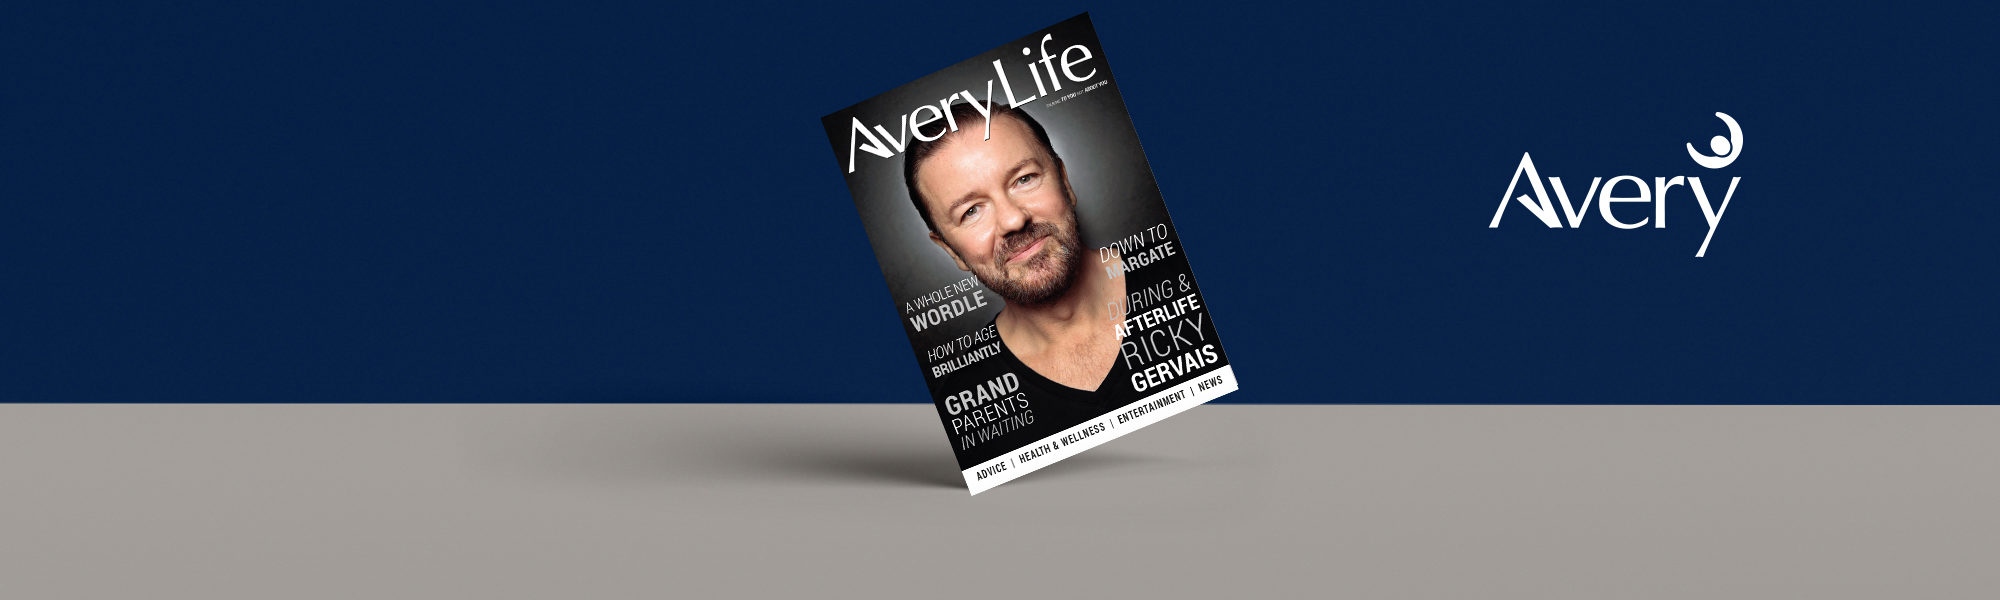 Avery Life Issue 5 web banner